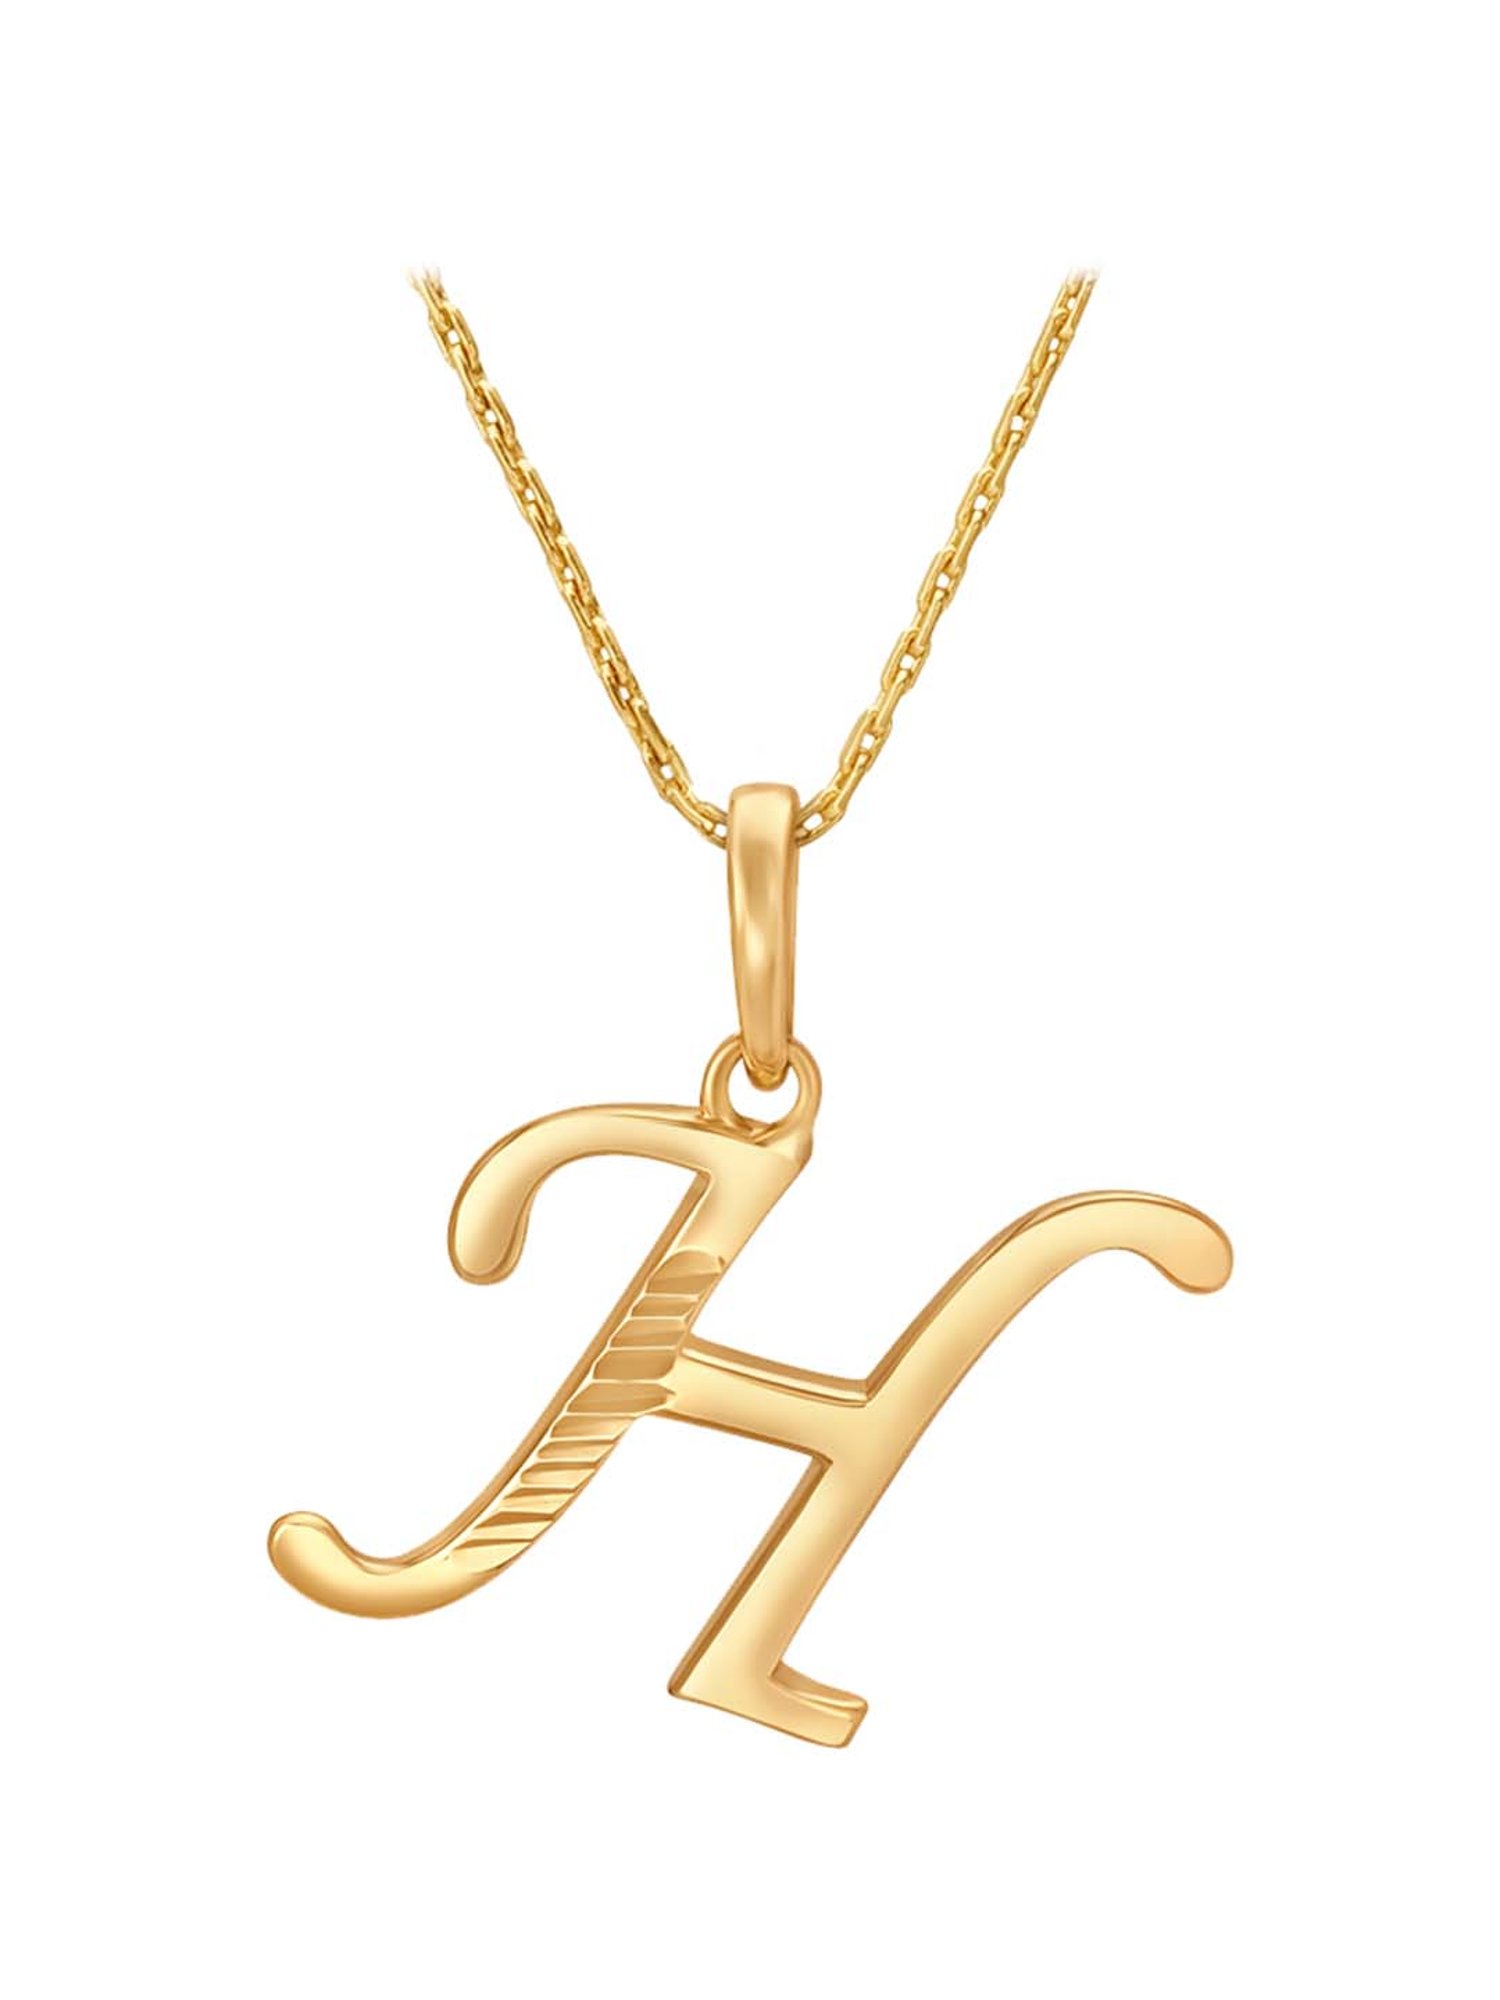 Order an Initial Necklace or Pendant for Yourself or a Loved One - The  Caratlane